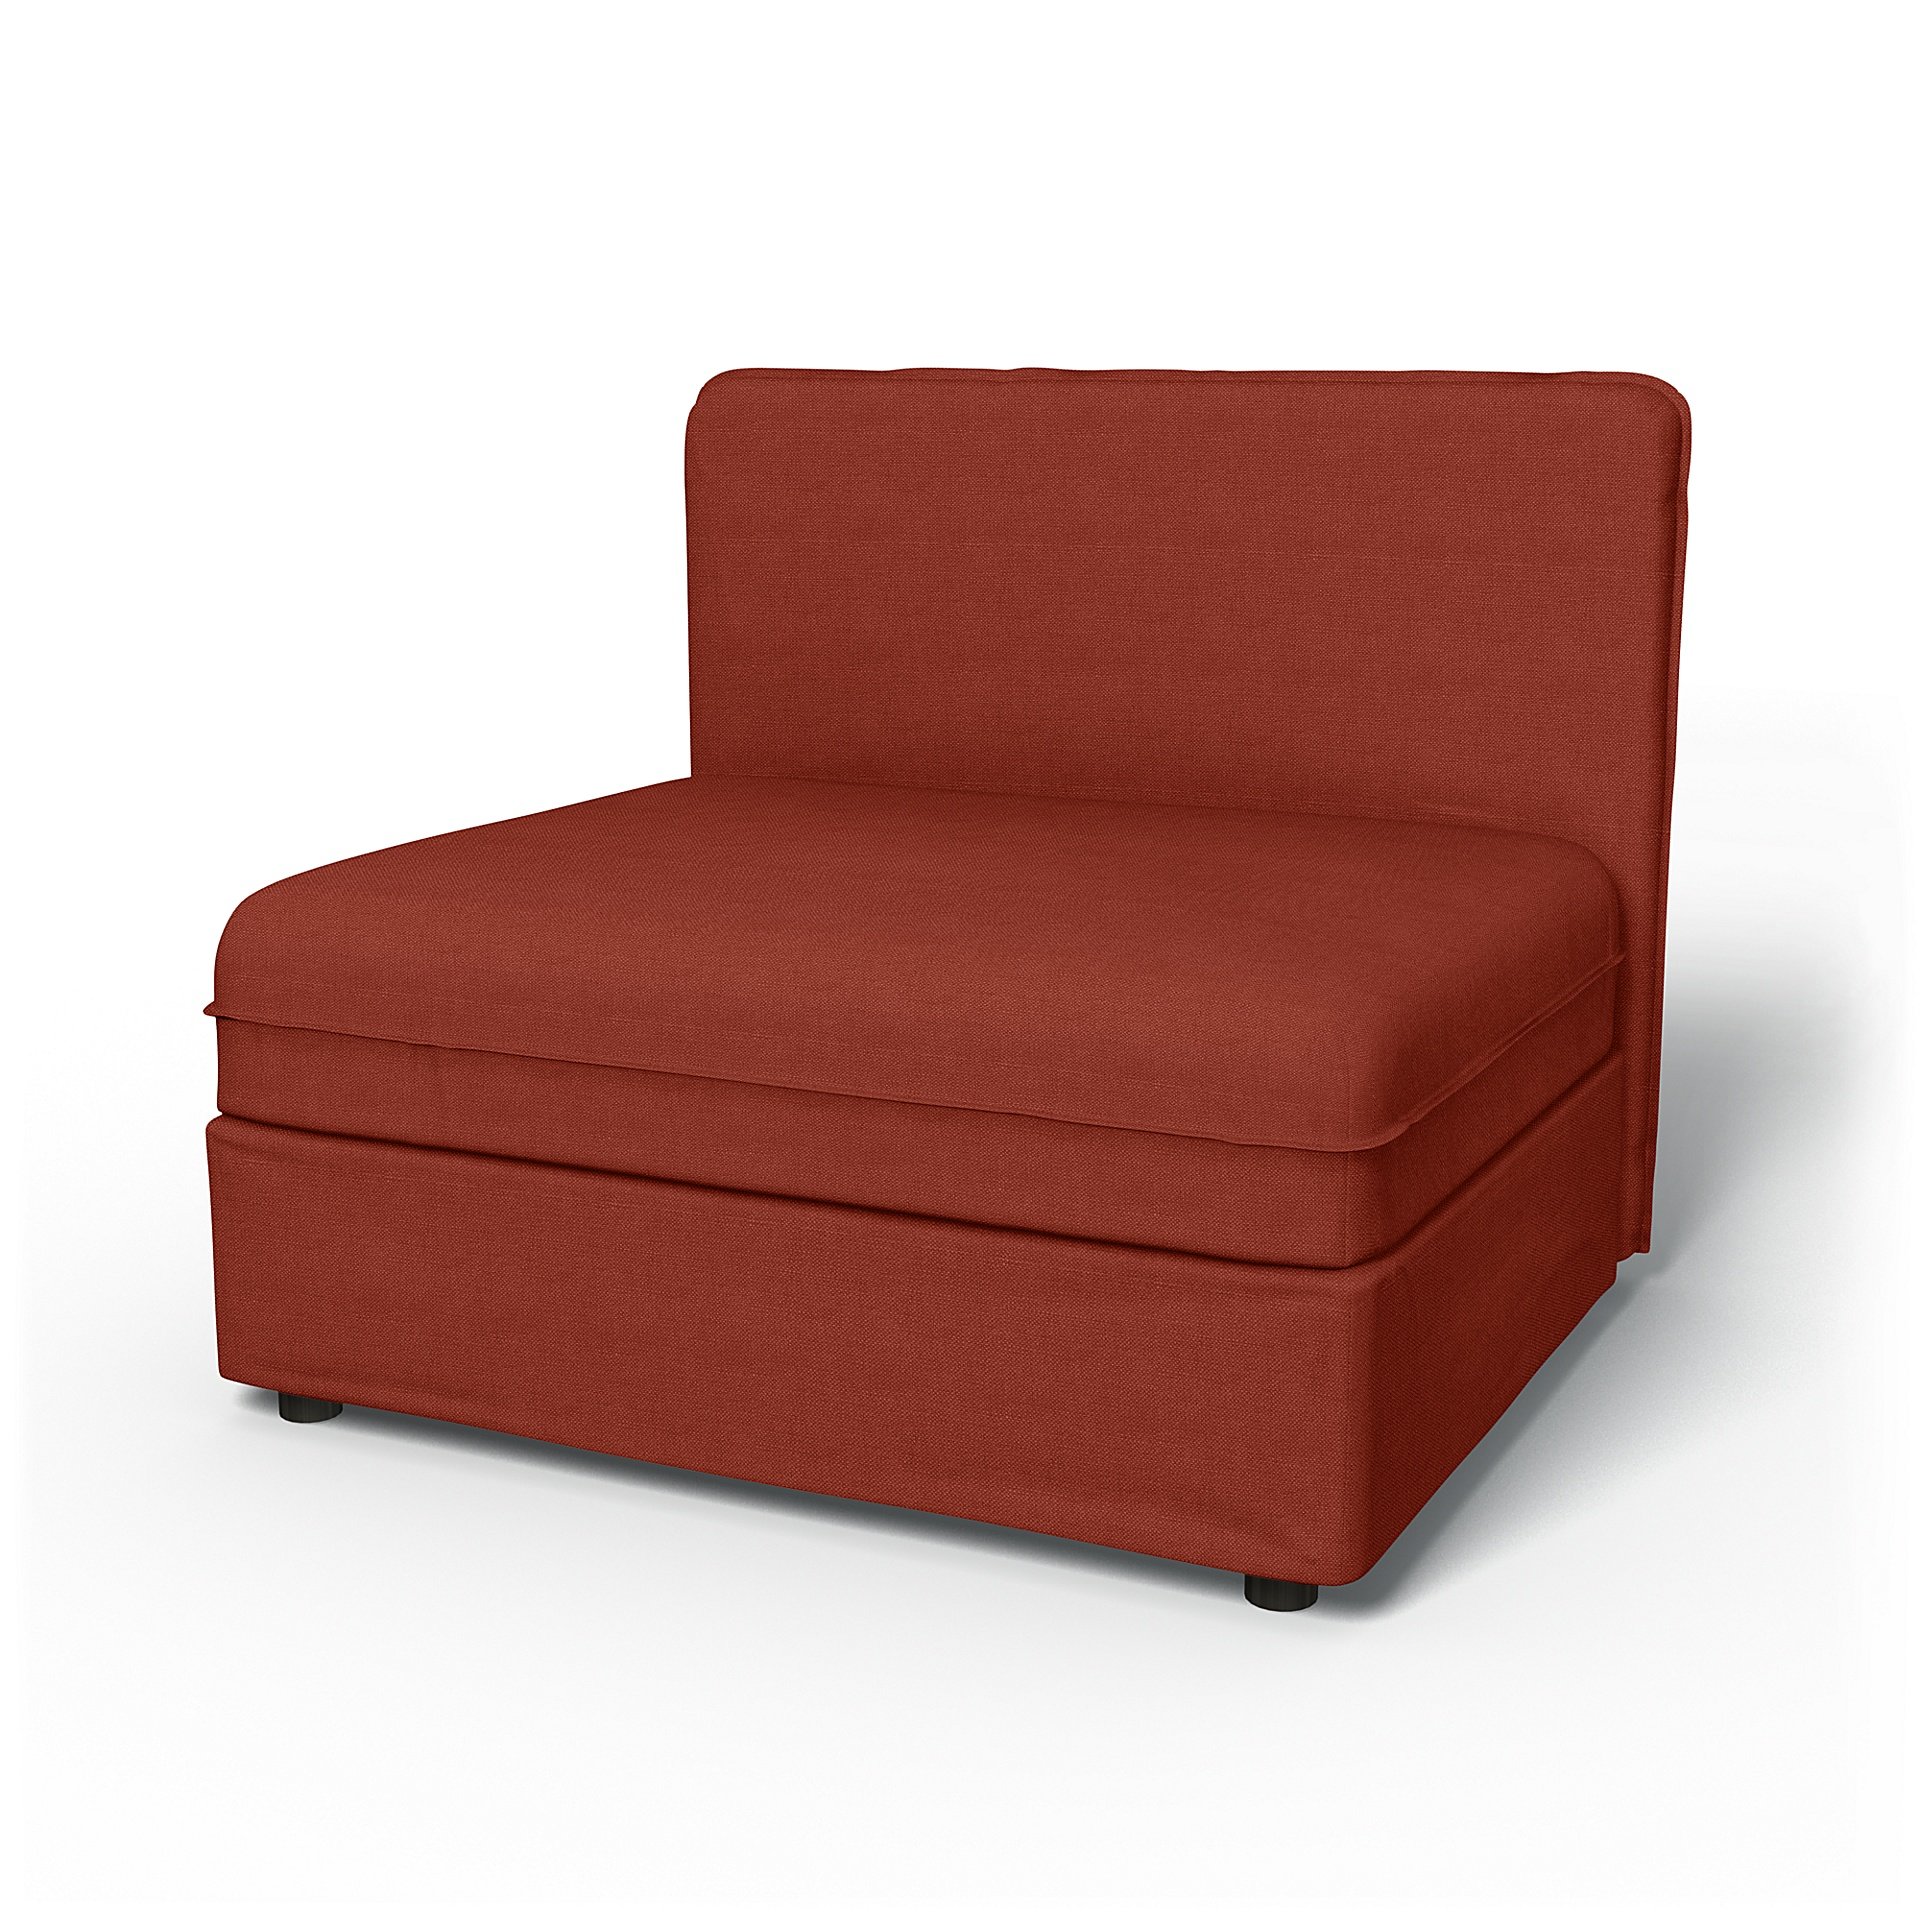 IKEA - Vallentuna Seat Module with Low Back Cover 100x80cm 39x32in, Cayenne, Linen - Bemz